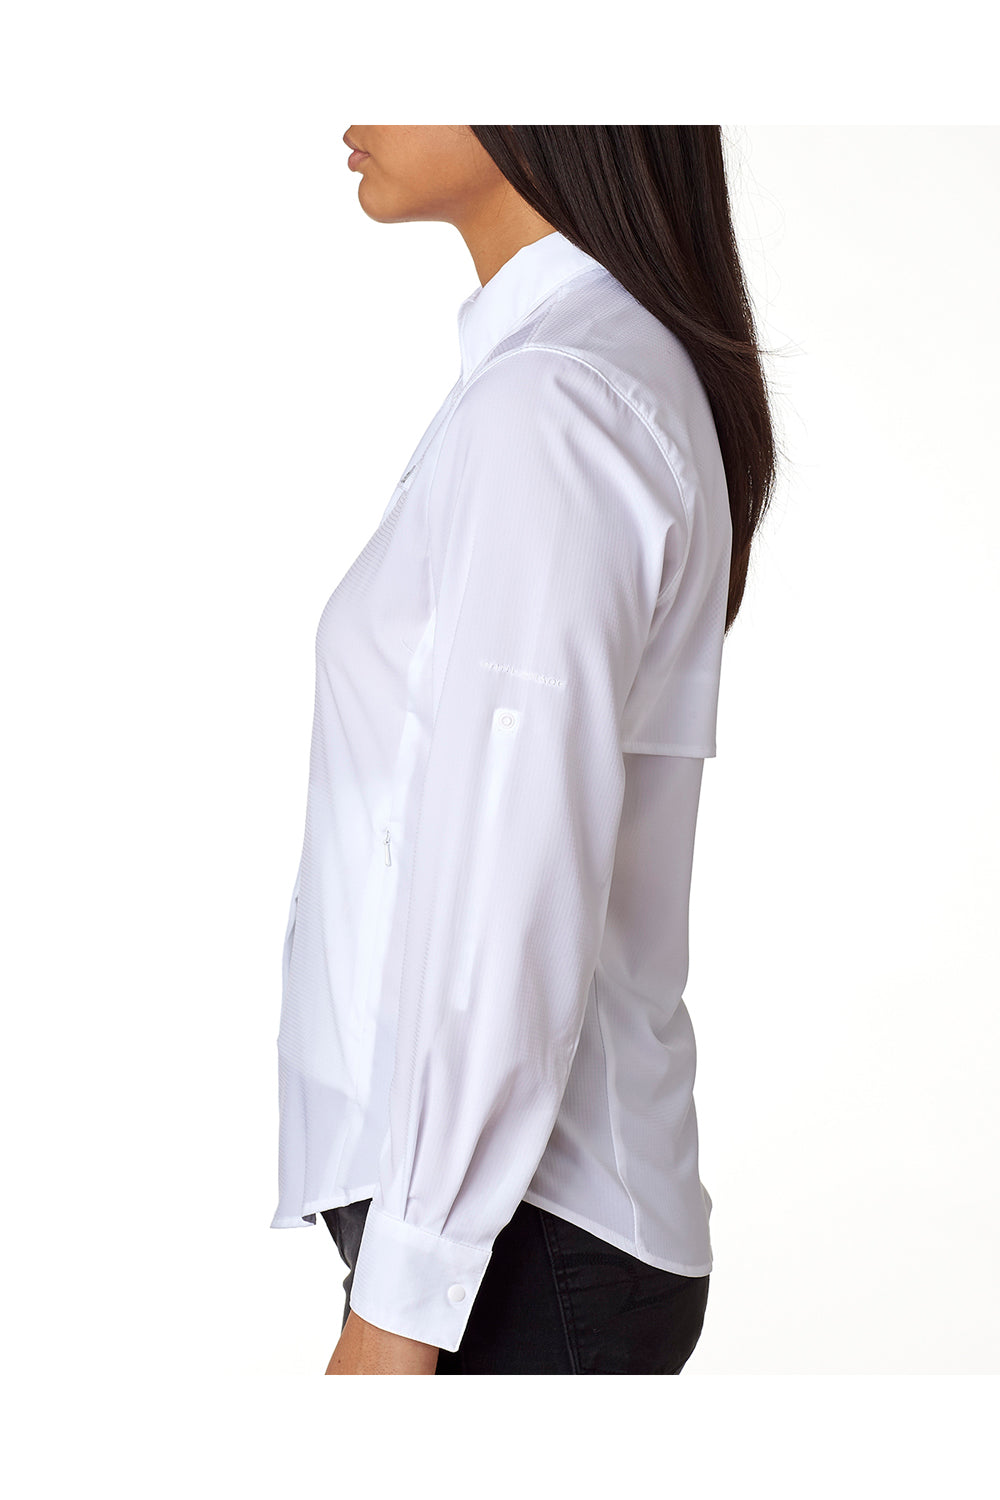 Columbia 7278 Womens Tamiami II Moisture Wicking Long Sleeve Button Down Shirt w/ Double Pockets White Side